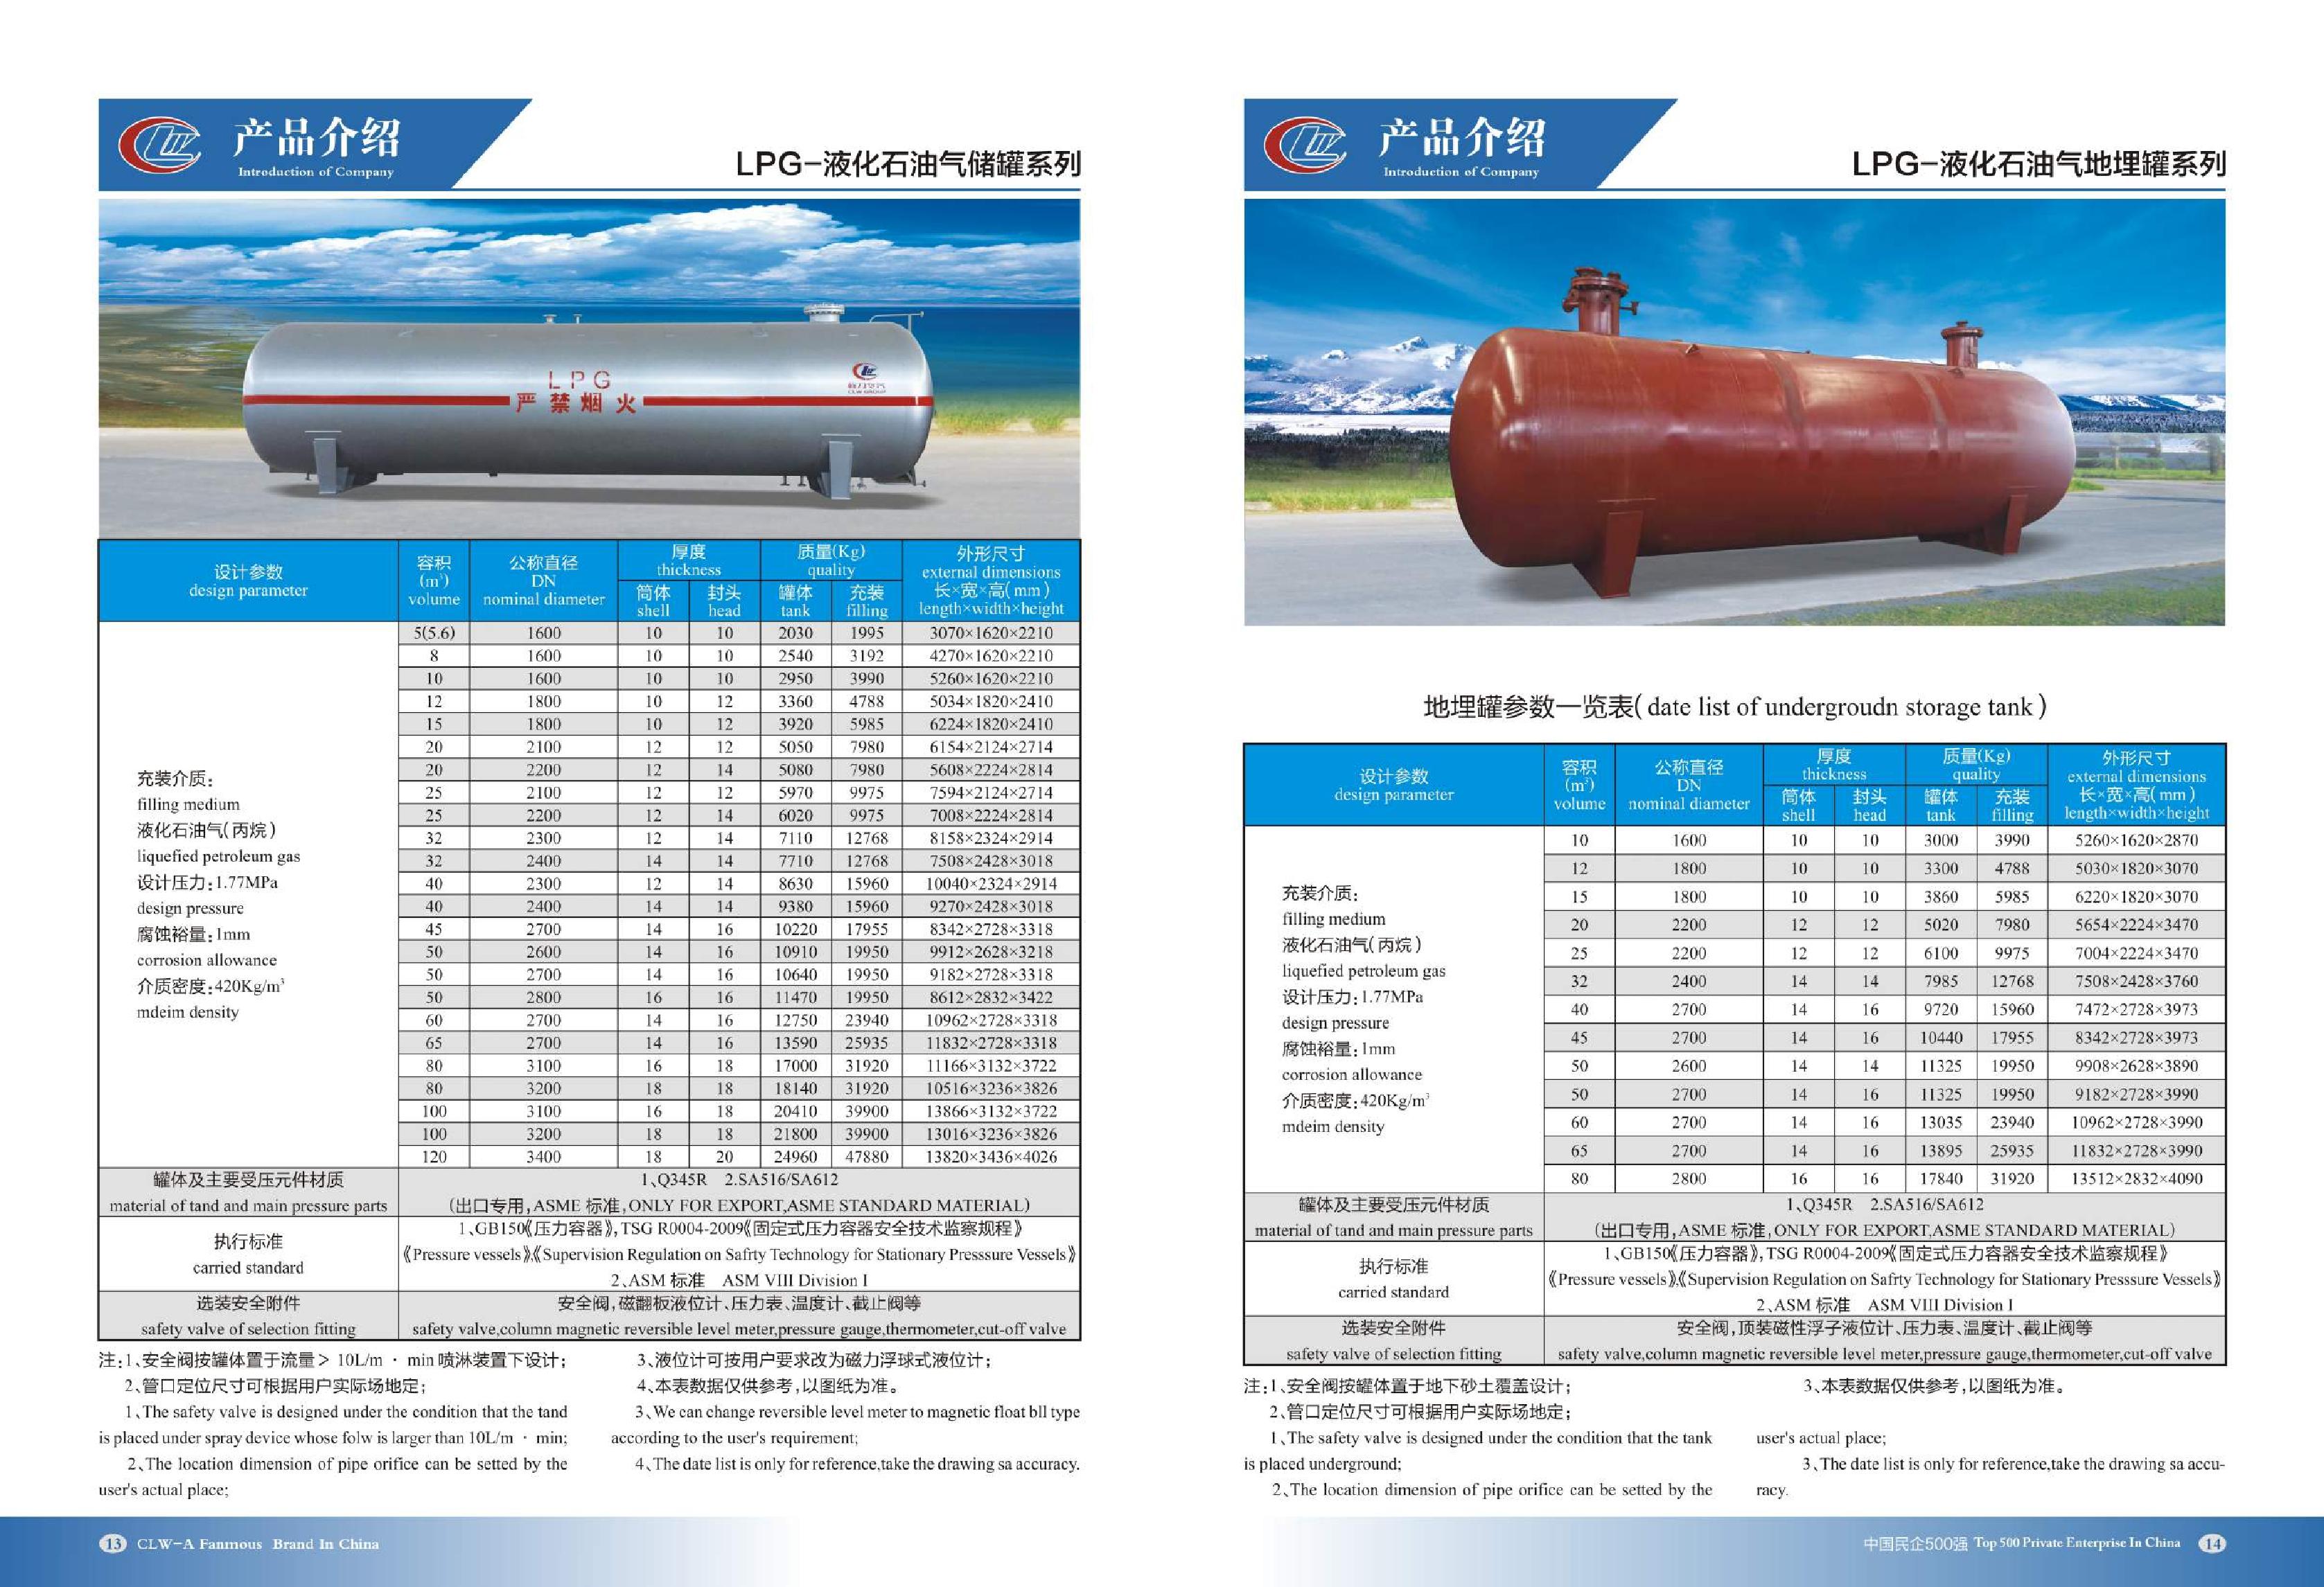 CLW BRAND LPG PRODUCTS CATALOG_7.jpg